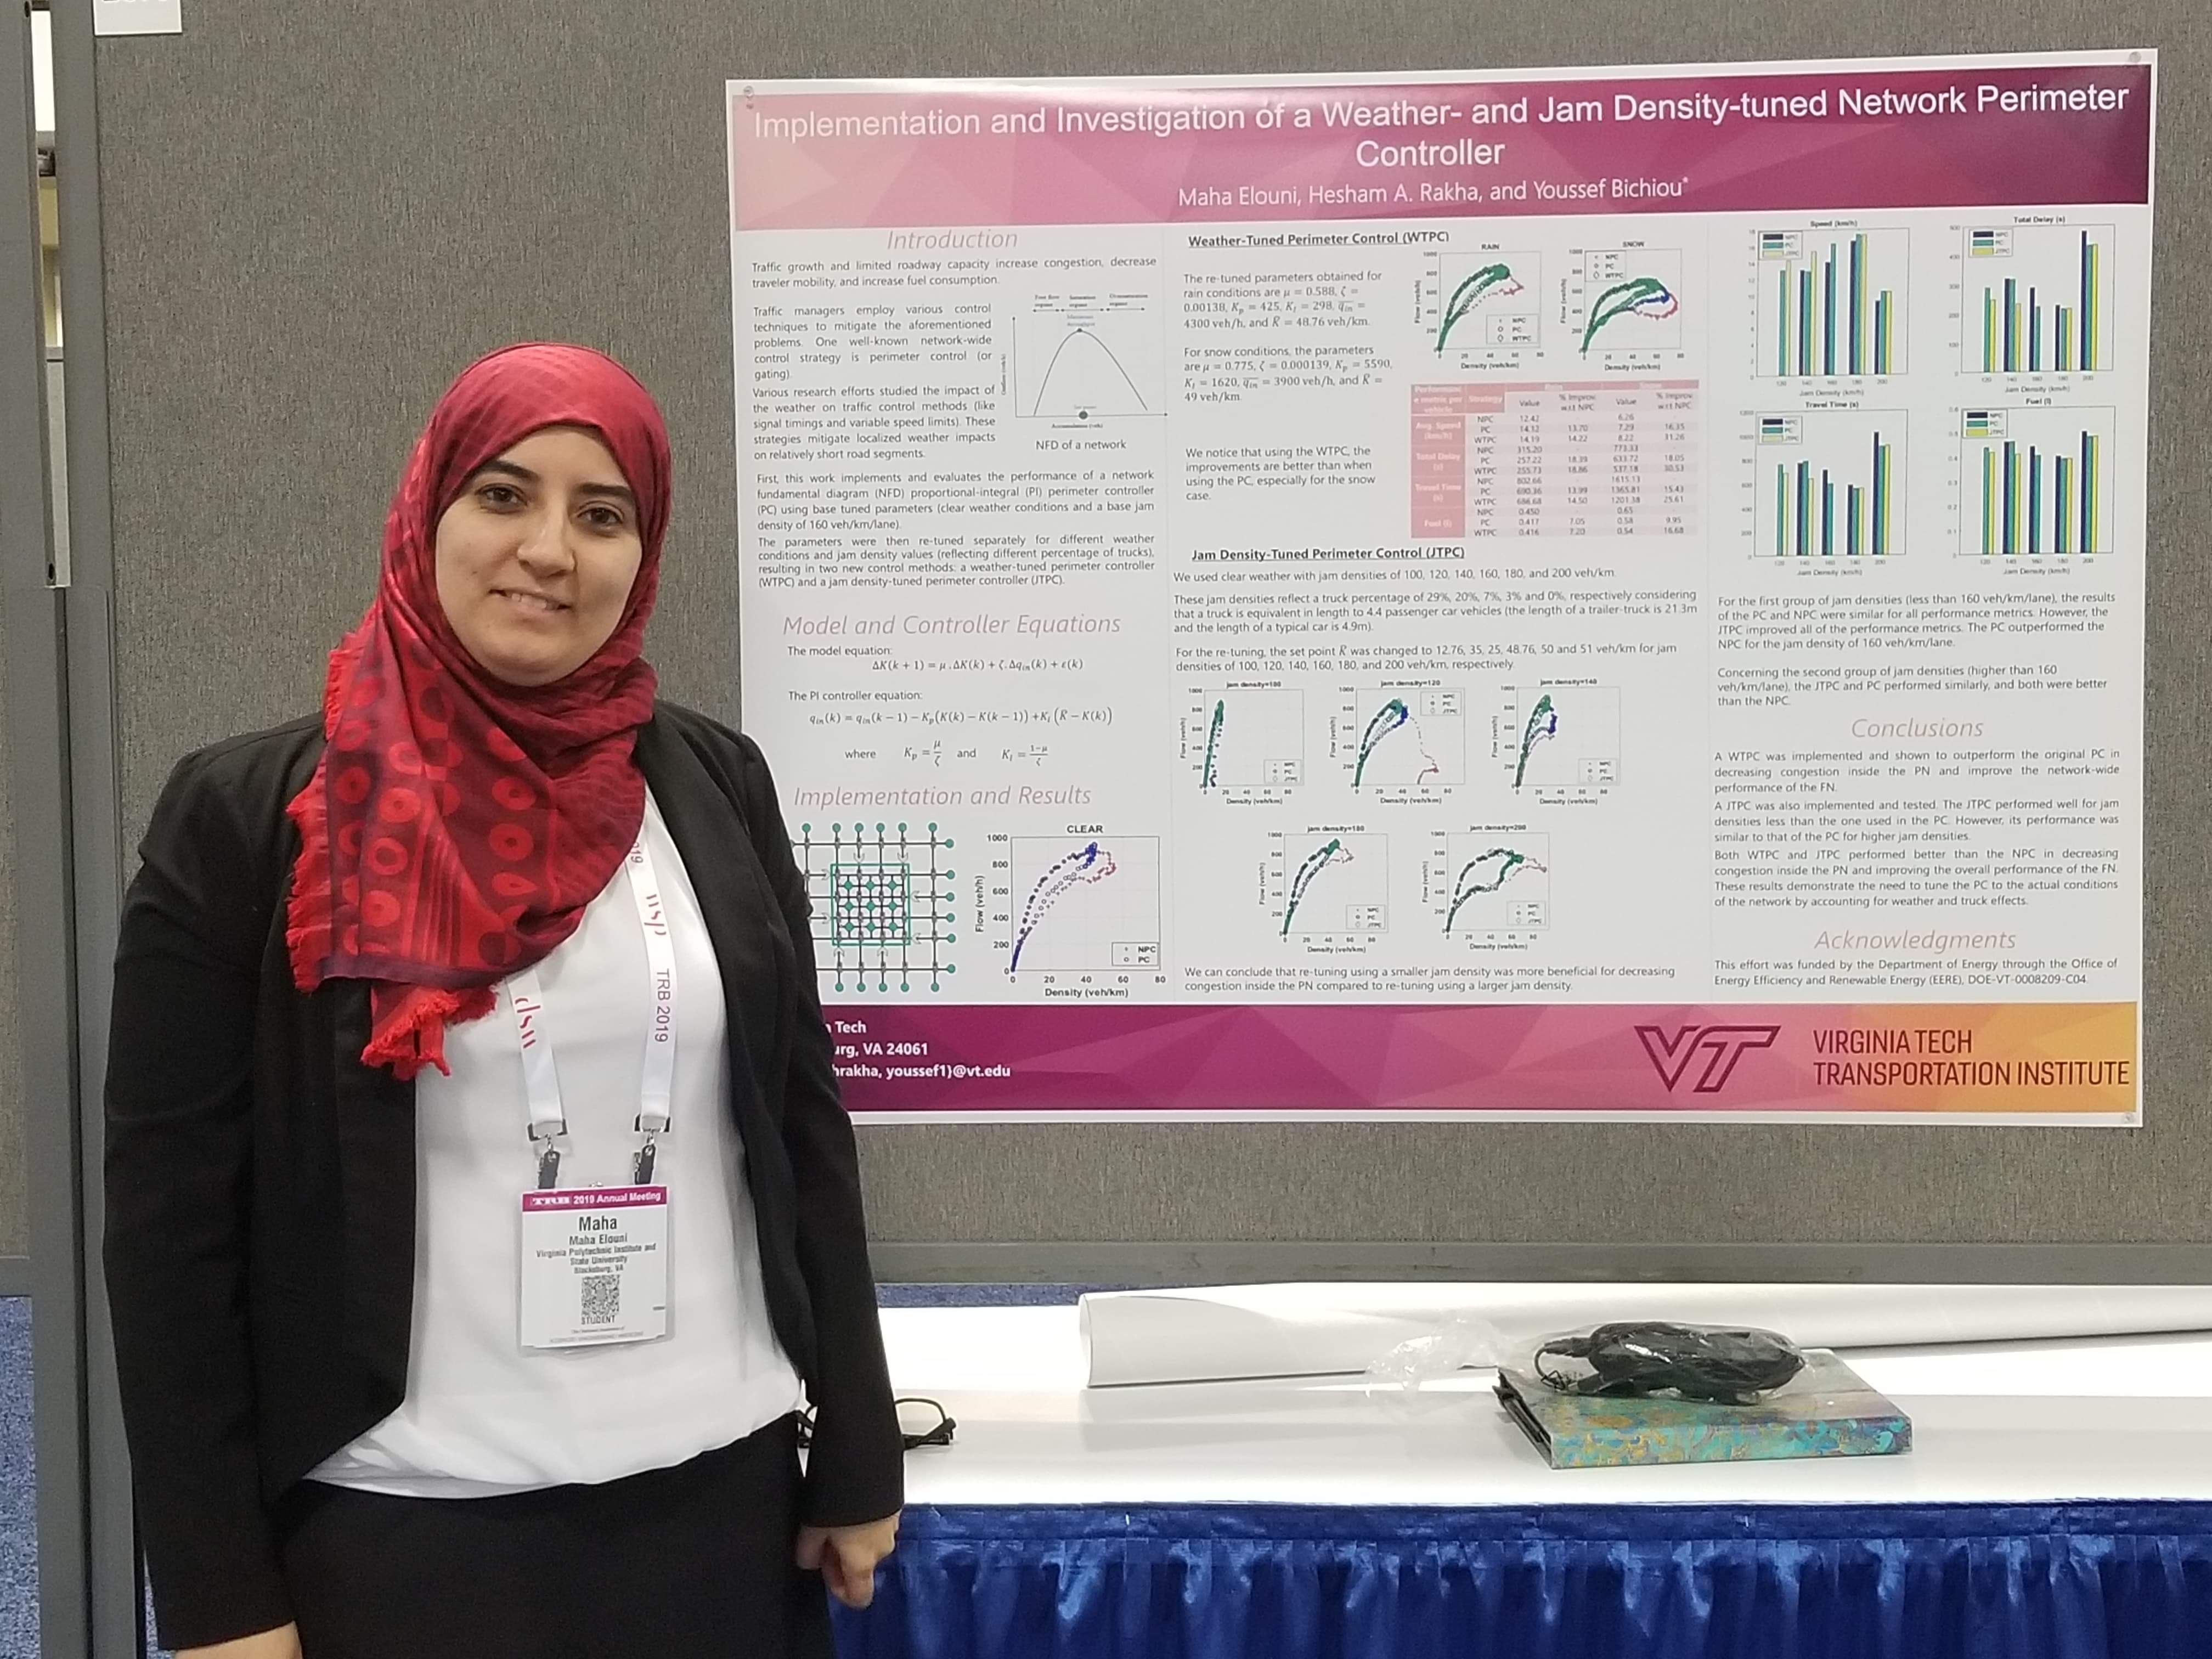 This photo shows a young woman in a black jacket, white blouse, and head head covering standing in front of a research poster covered with text, graphs, and bar charts.